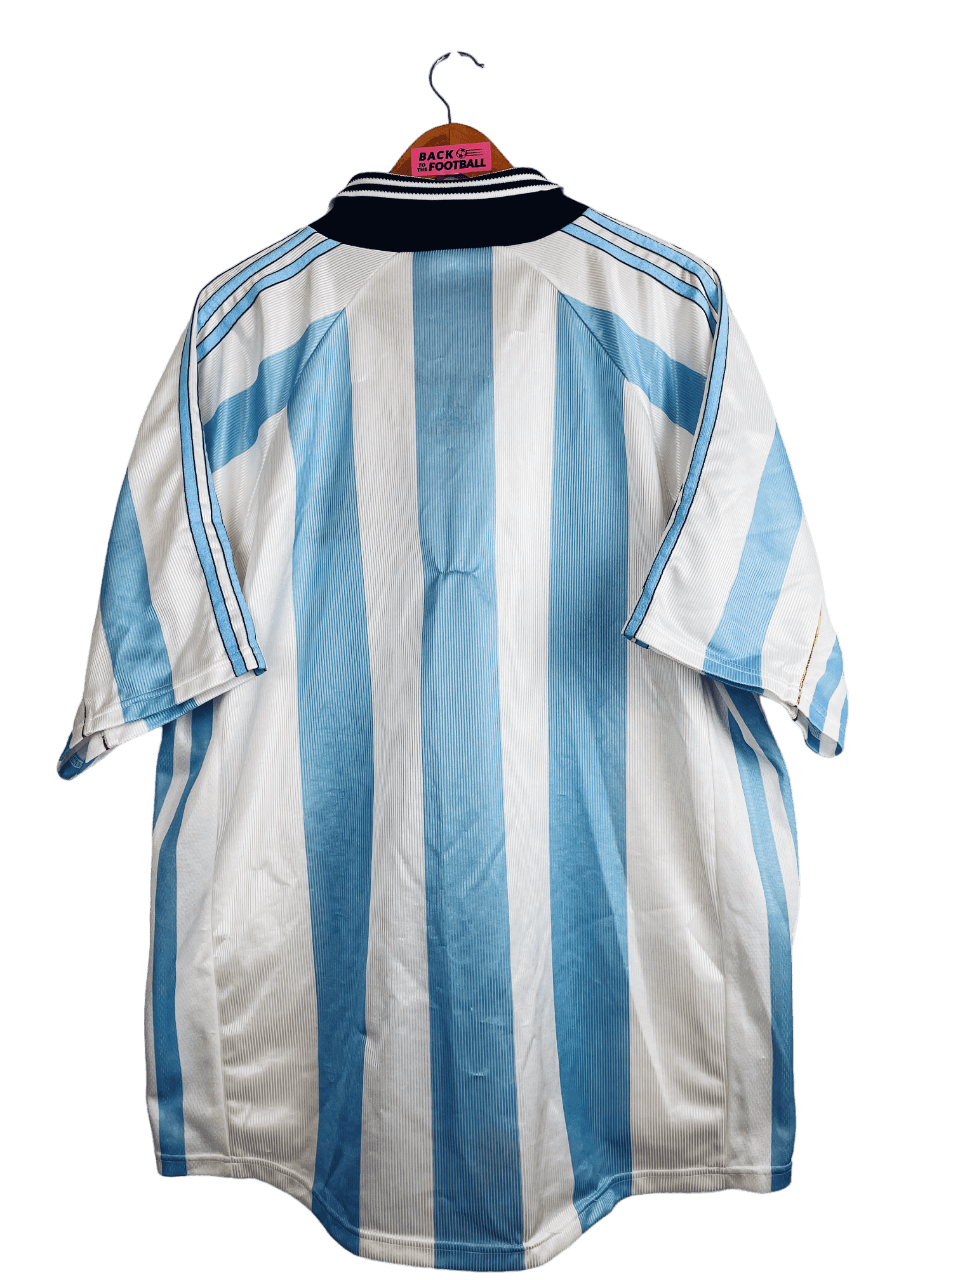 Maillot vintage 1998 - Argentine (XL) - Back To The Football